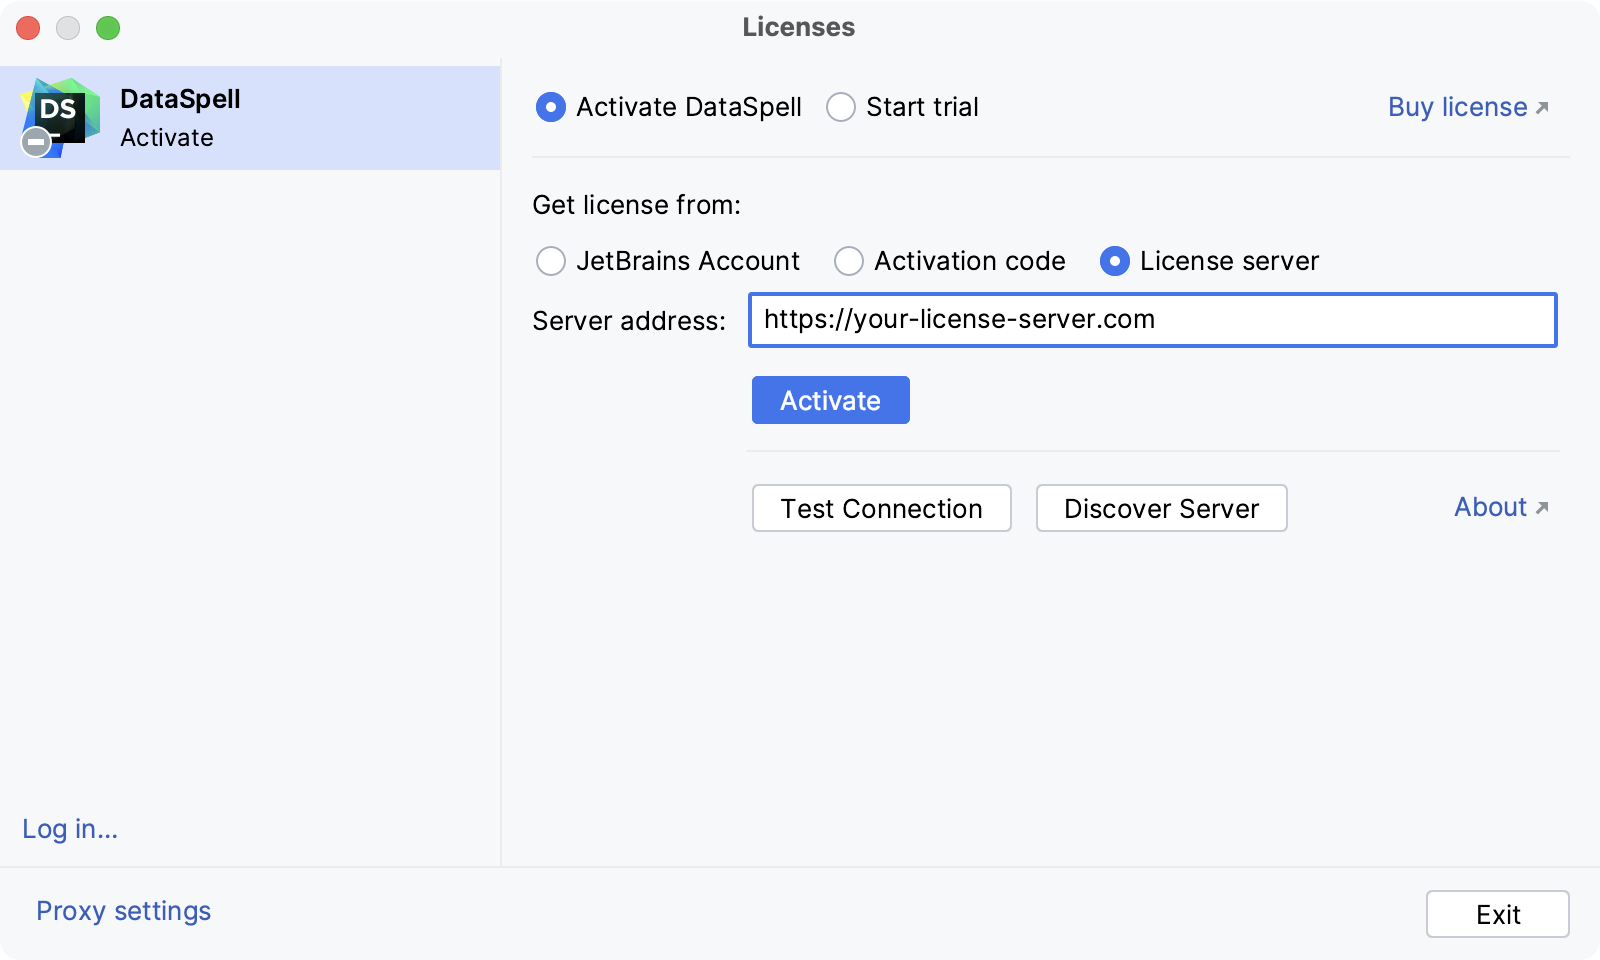 Activate DataSpell license with a license server